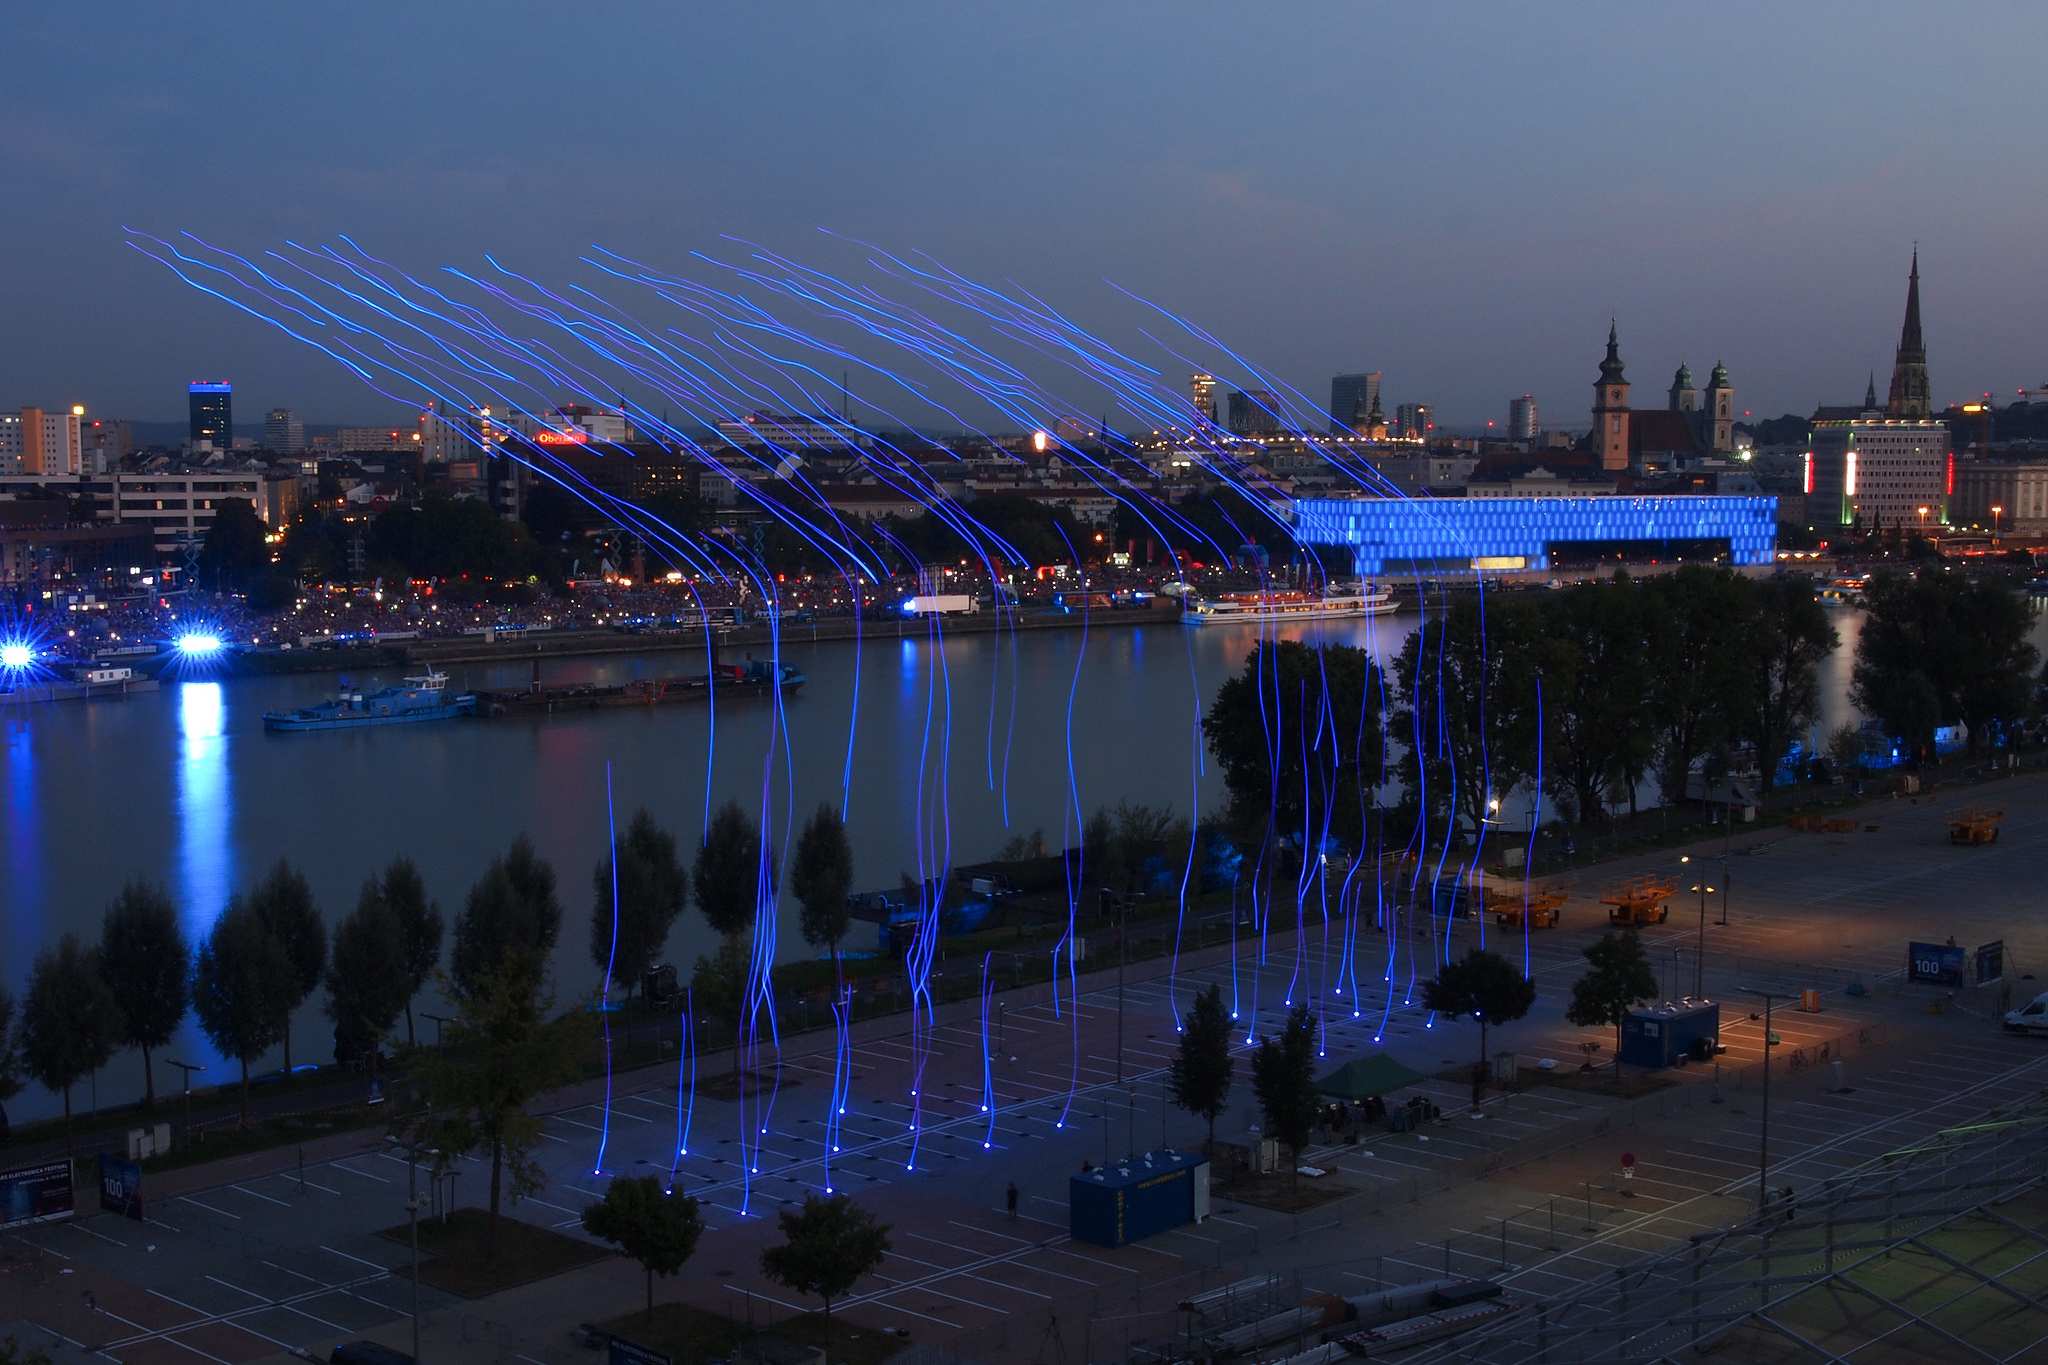 DRONE 100 – Spaxels over Linz